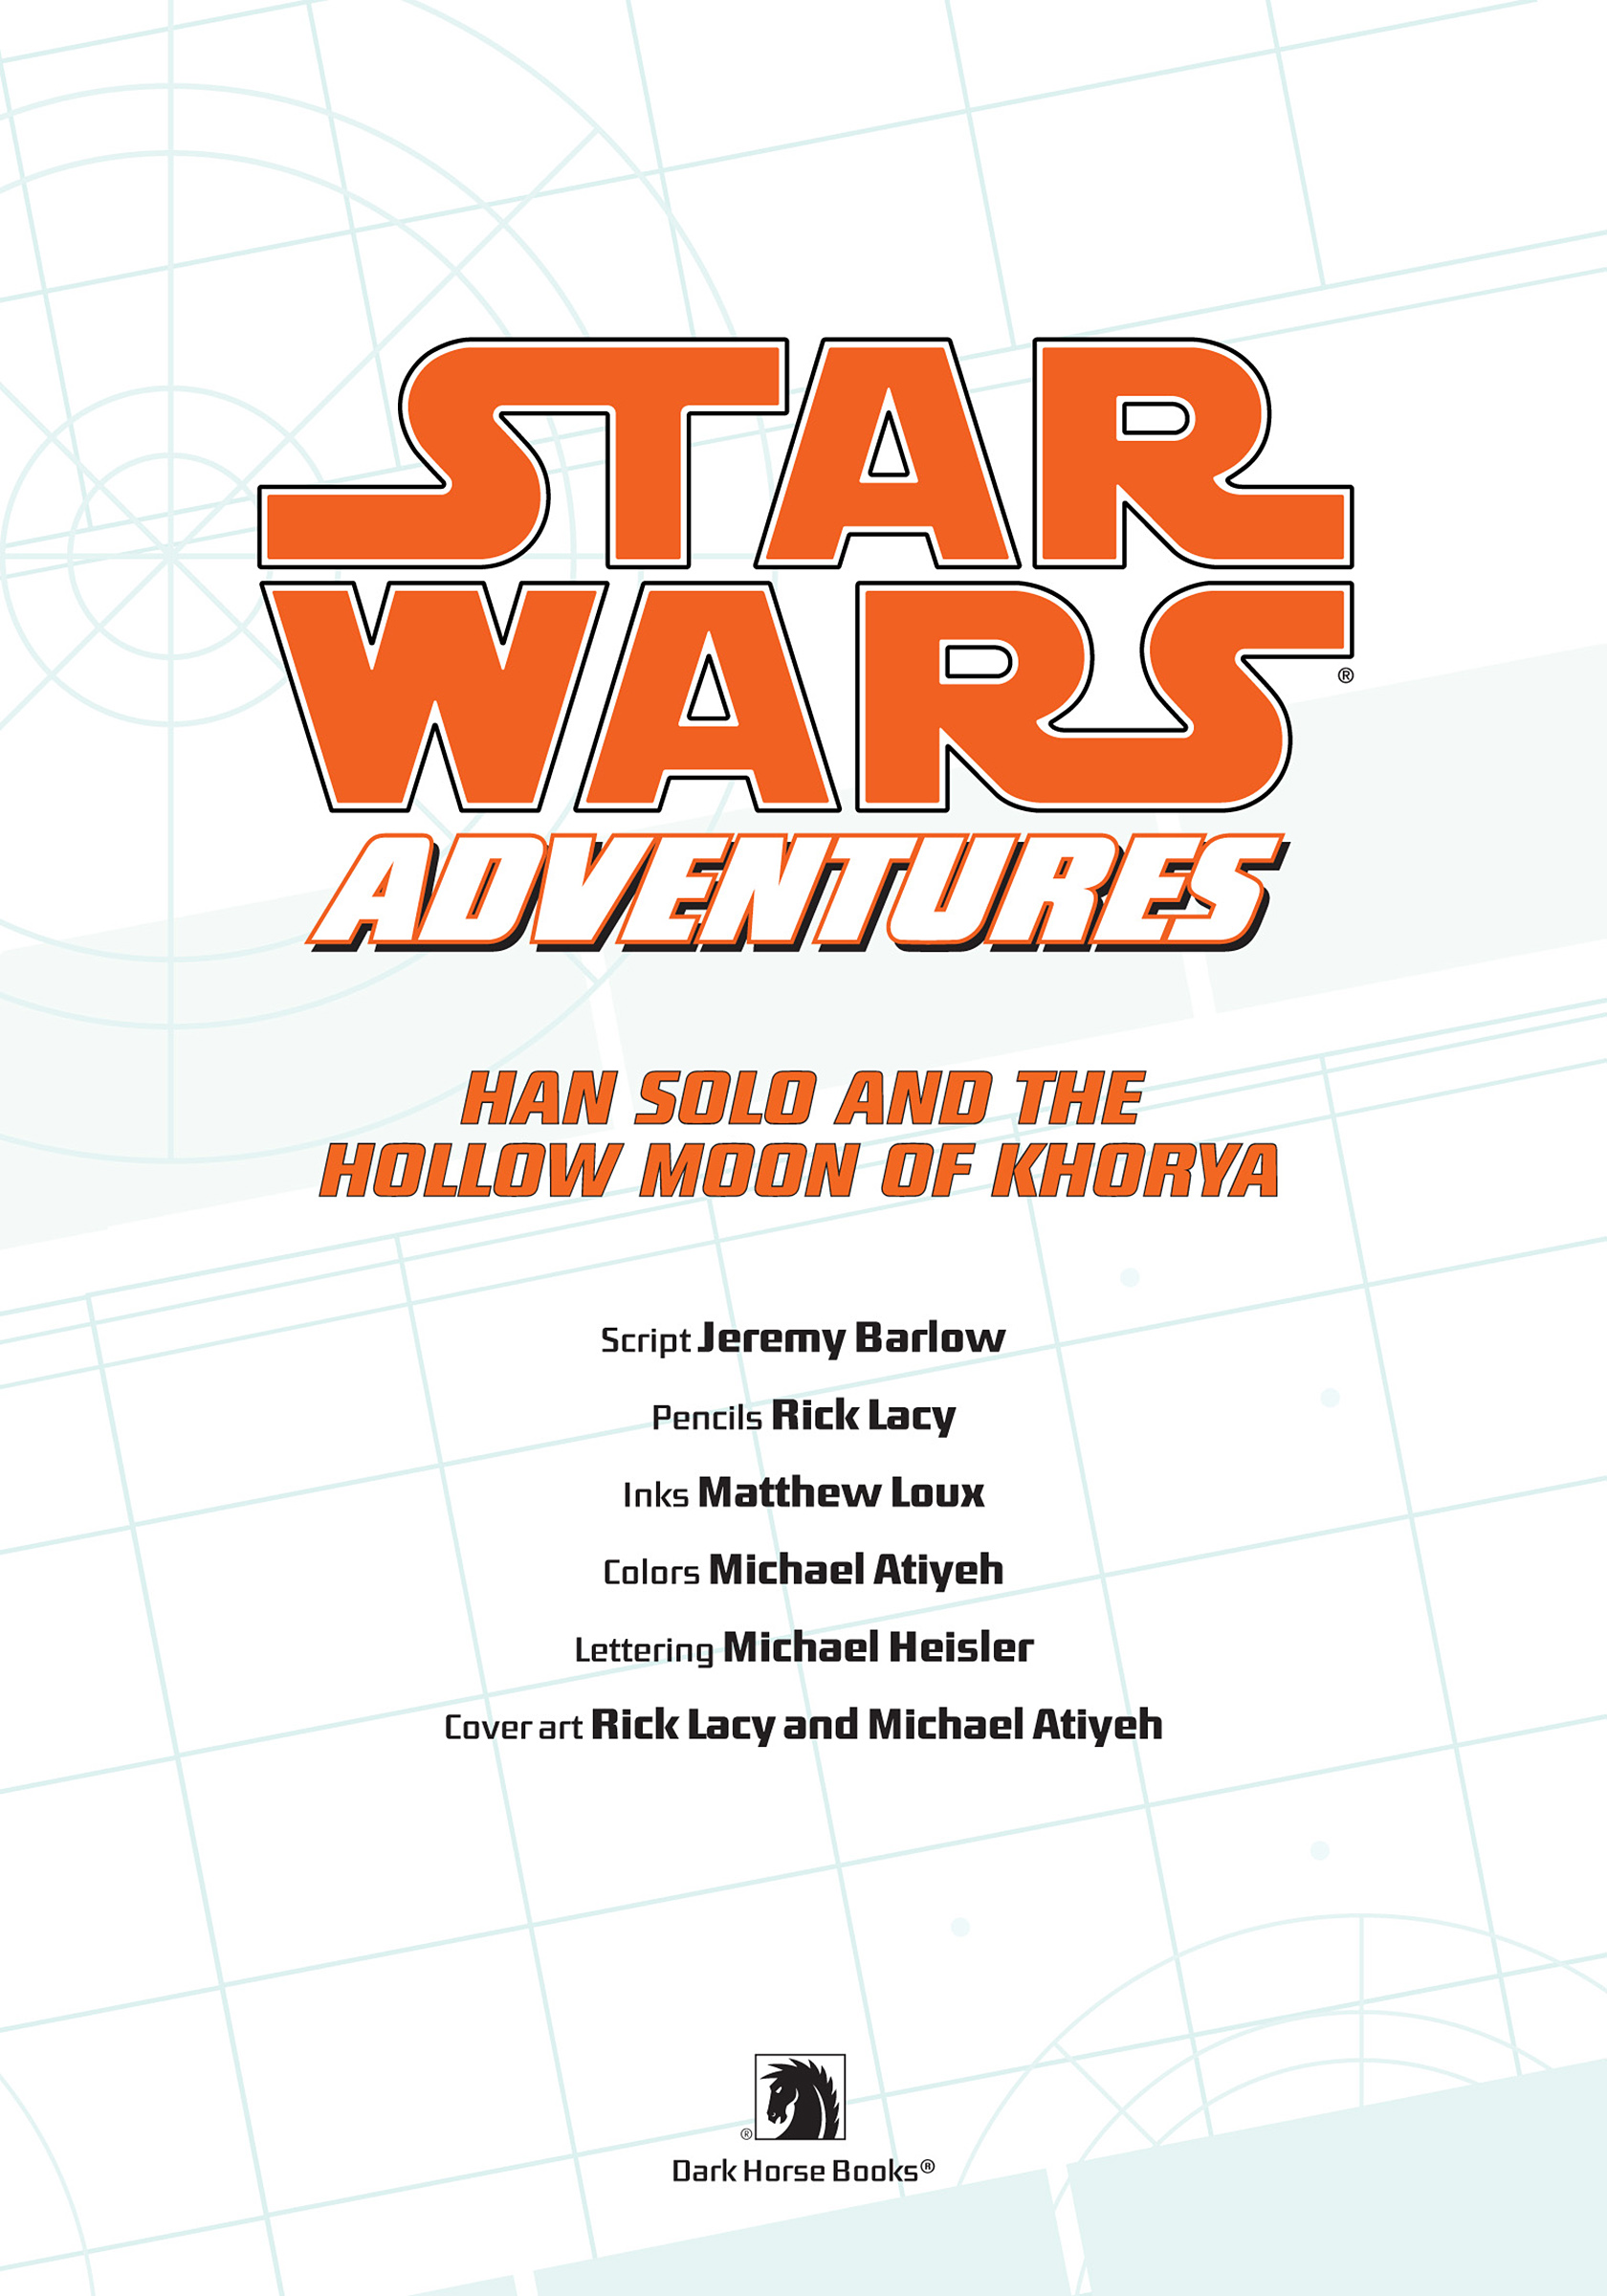 Read online Star Wars Adventures comic -  Issue # Issue Han Solo and the Hollow Moon of Khorya - 5